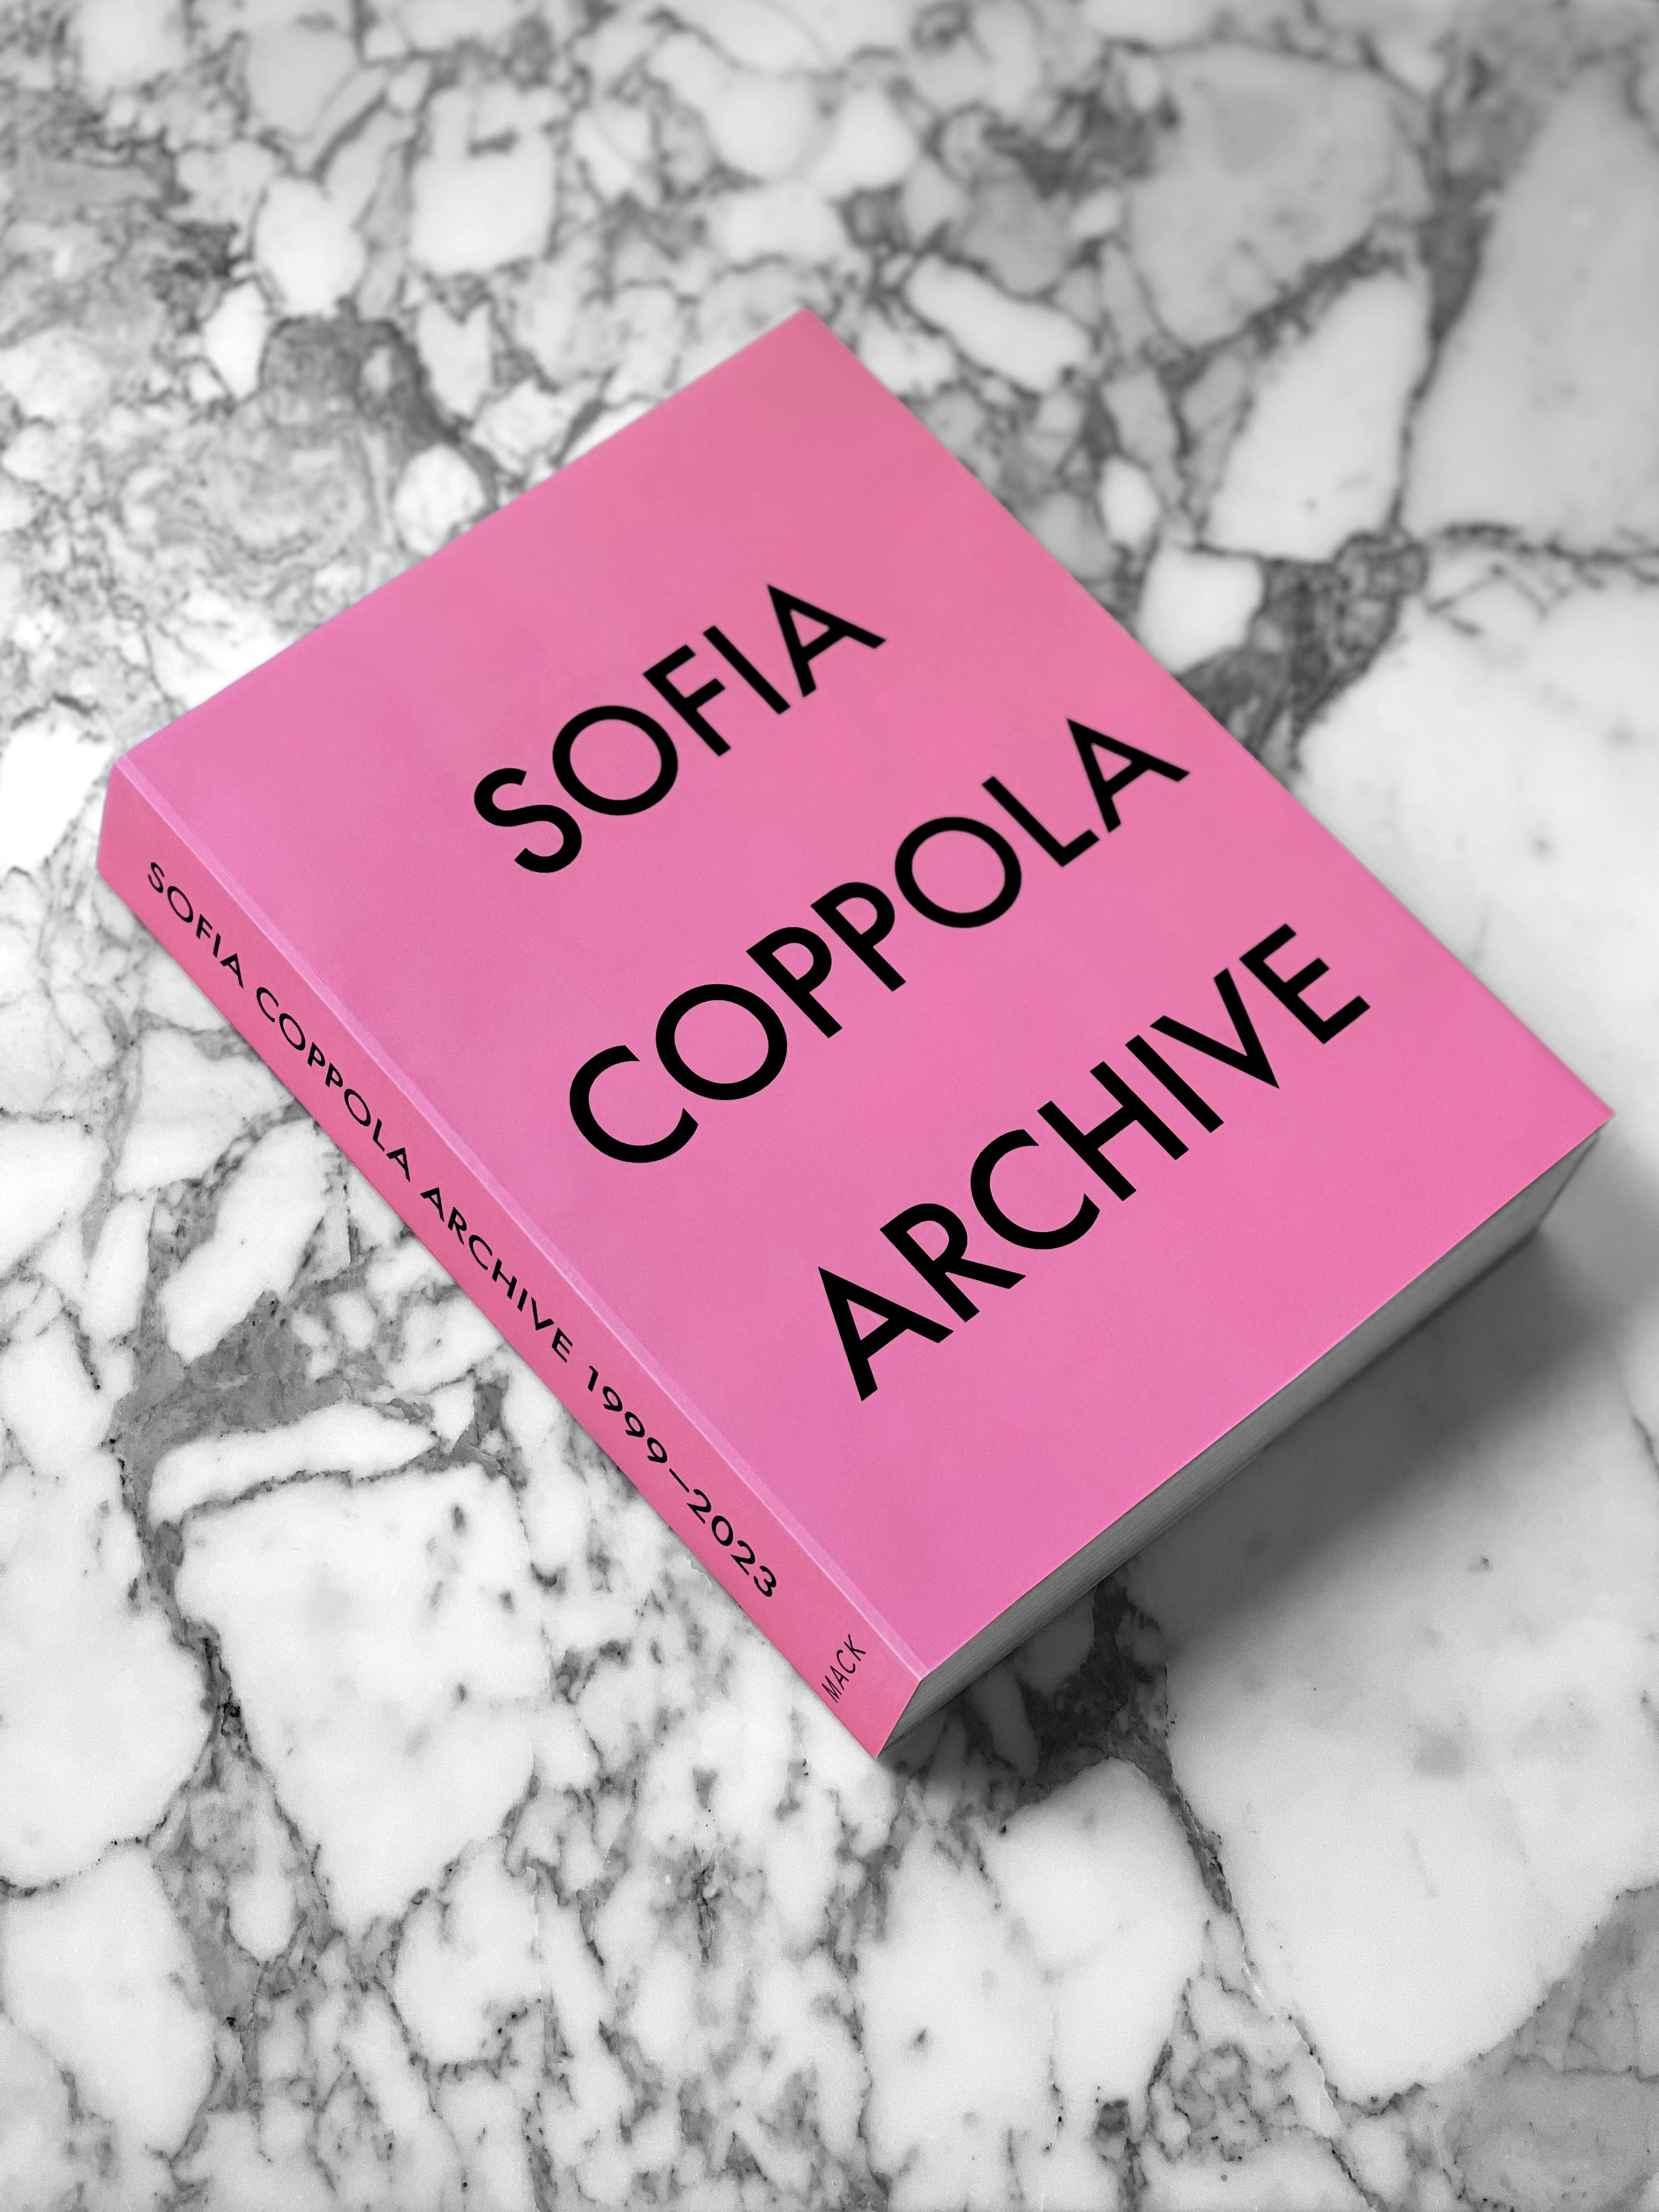 PALMER on Instagram: This month, visionary director Sofia Coppola releases  her first book, Archive, in which she intimately annotates her creative  process of filmmaking and presents her own unseen, personal  behind-the-scenes imagery